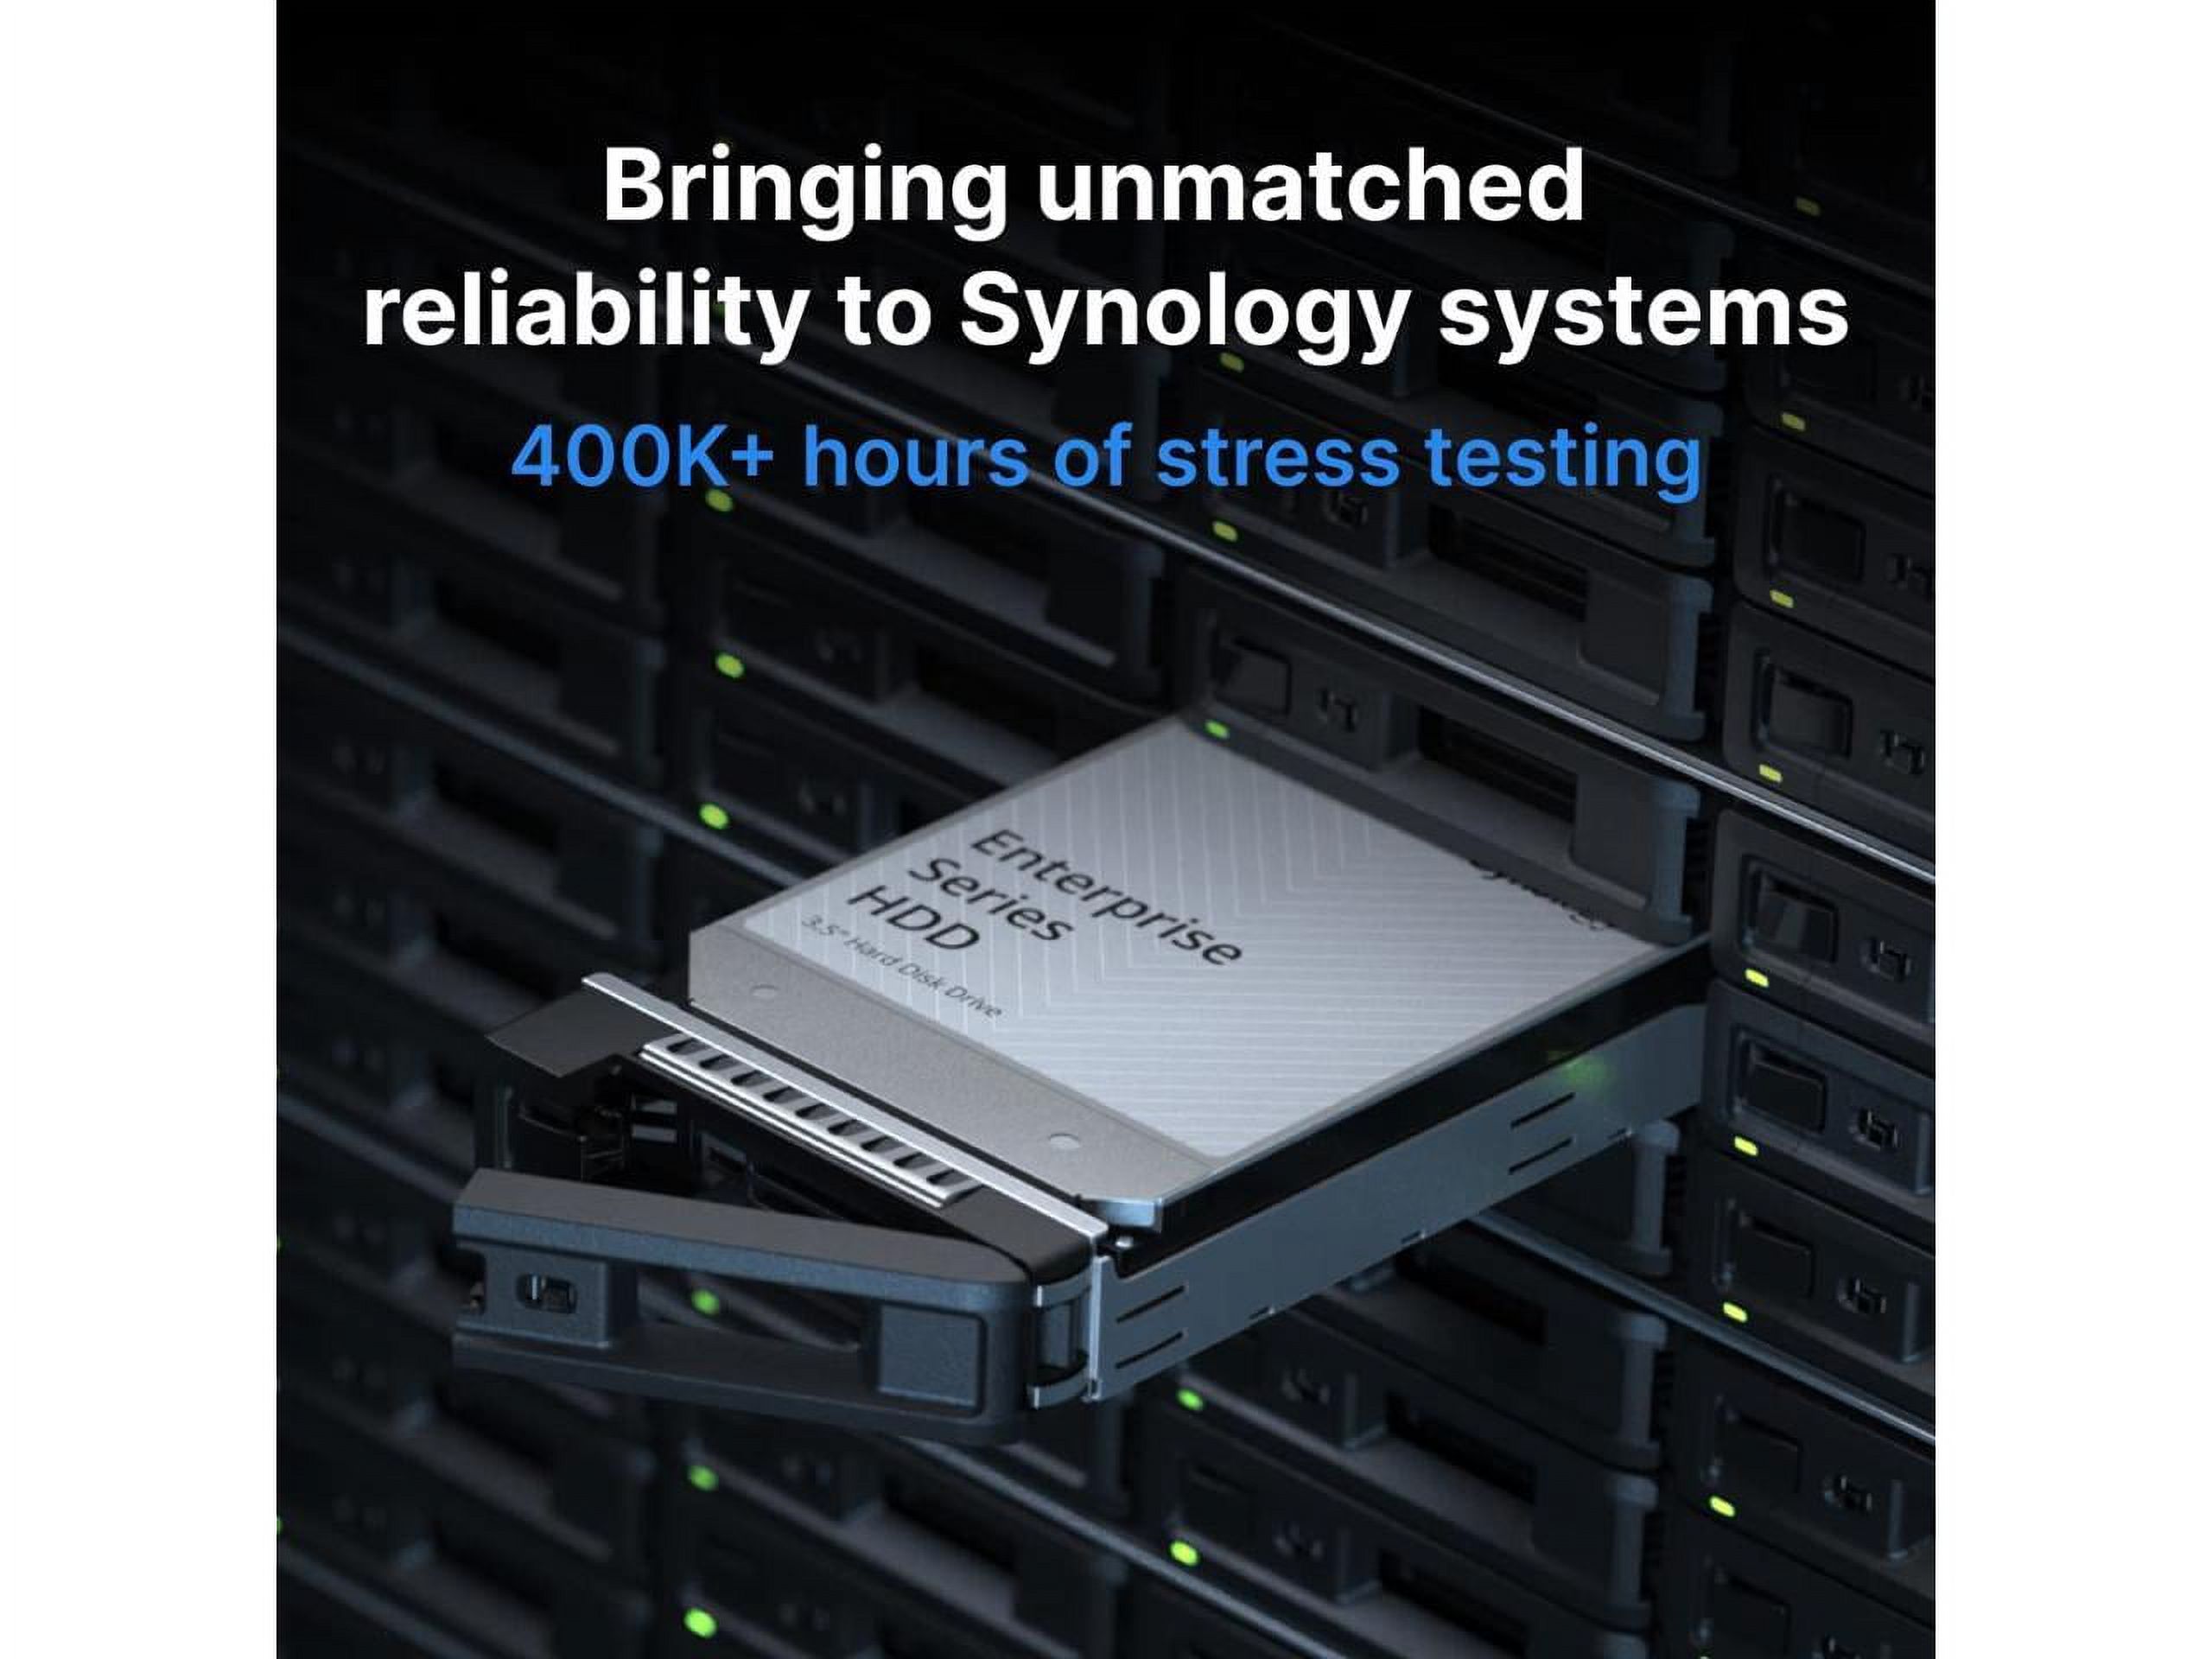 Synology HAT5300-4T 4TB 7200 RPM 256MB Cache SATA 6.0Gb/s 3.5" Enterprise 3.5" SATA HDD Retail - image 4 of 4